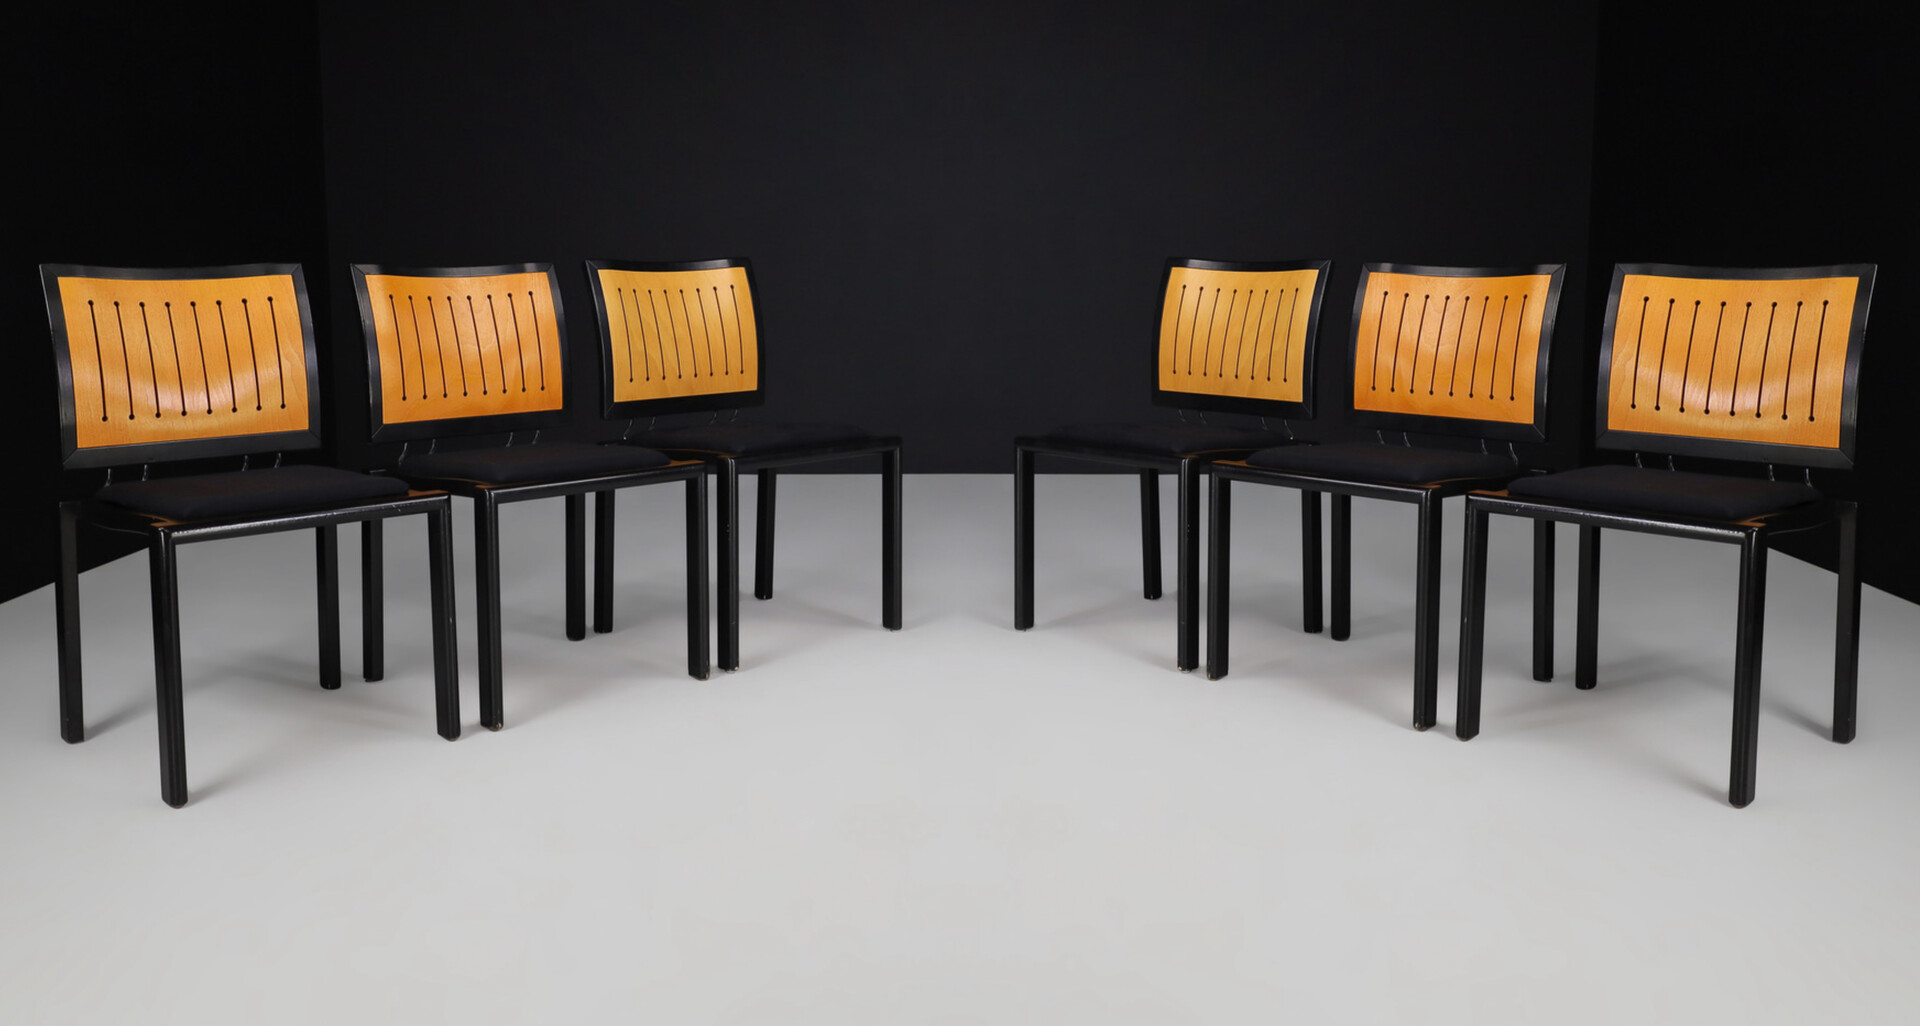 Modern Quadro Chairs by Bruno Rey & Charles Polin for Dietiker, Switserland, 1980s Late-20th century